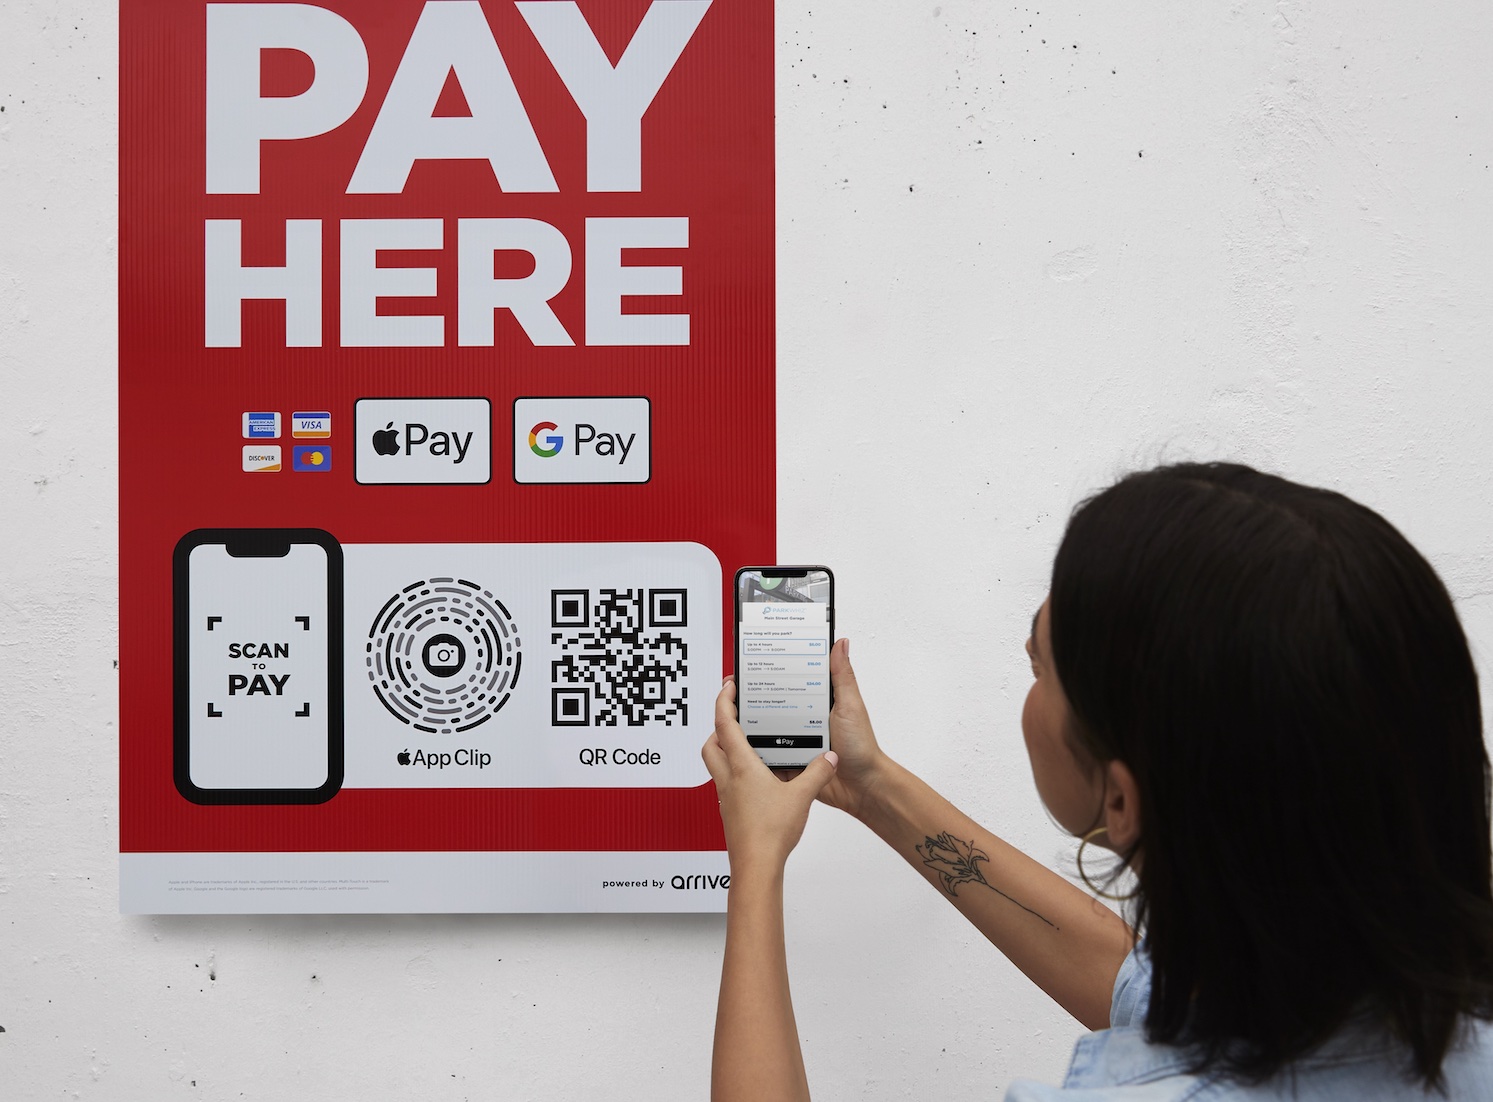 A woman uses her phone to scan one of FLASH’s Scan to Pay signs, WHICH ALLOWS USERS TO PAY USING APPLE’S APP CLIP AND QR CODE TECHNOLOGY. 